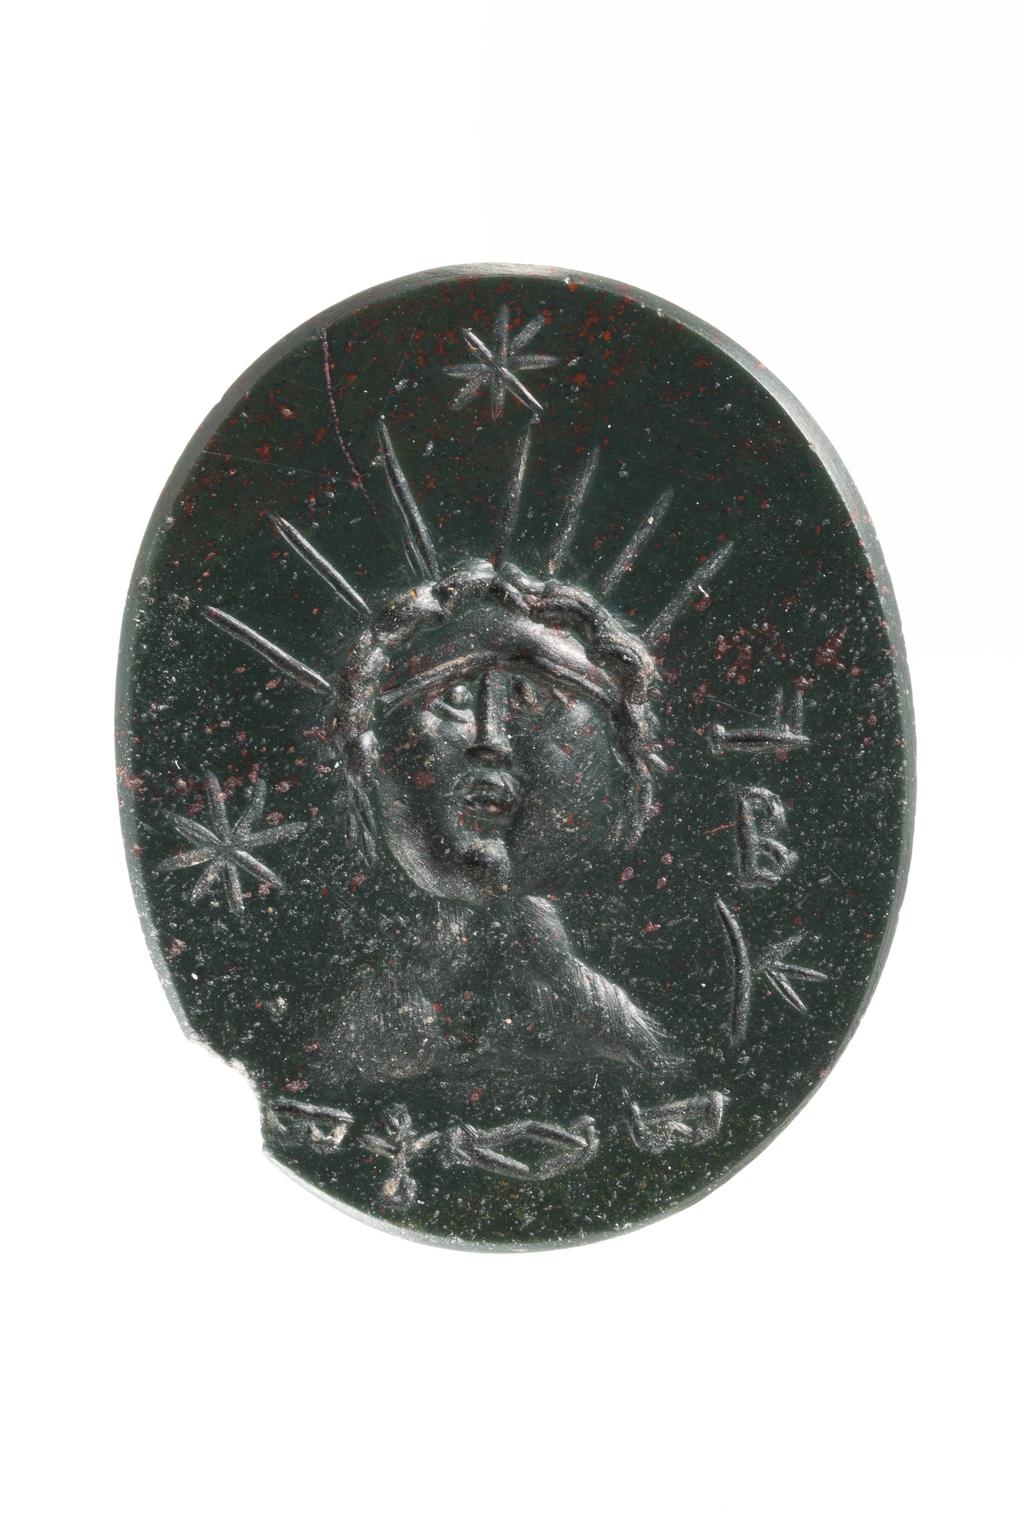 An image of Engraved gems. Magical amulet. Obverse: a bust of Helios, full-face, with a crown of seven rays set upon curly, loosely cropped hair. Above and to the left of the head hang two stars. The neck and shoulders are very roughly worked and are possibly meant to represent a rocky mountain. in the field are various letters and signs. Reverse: crescent and three stars. Intaglio cutting, bloodstone, 23 mm x 18 mm, circa 200-circa 400 AD. Roman Imperial.